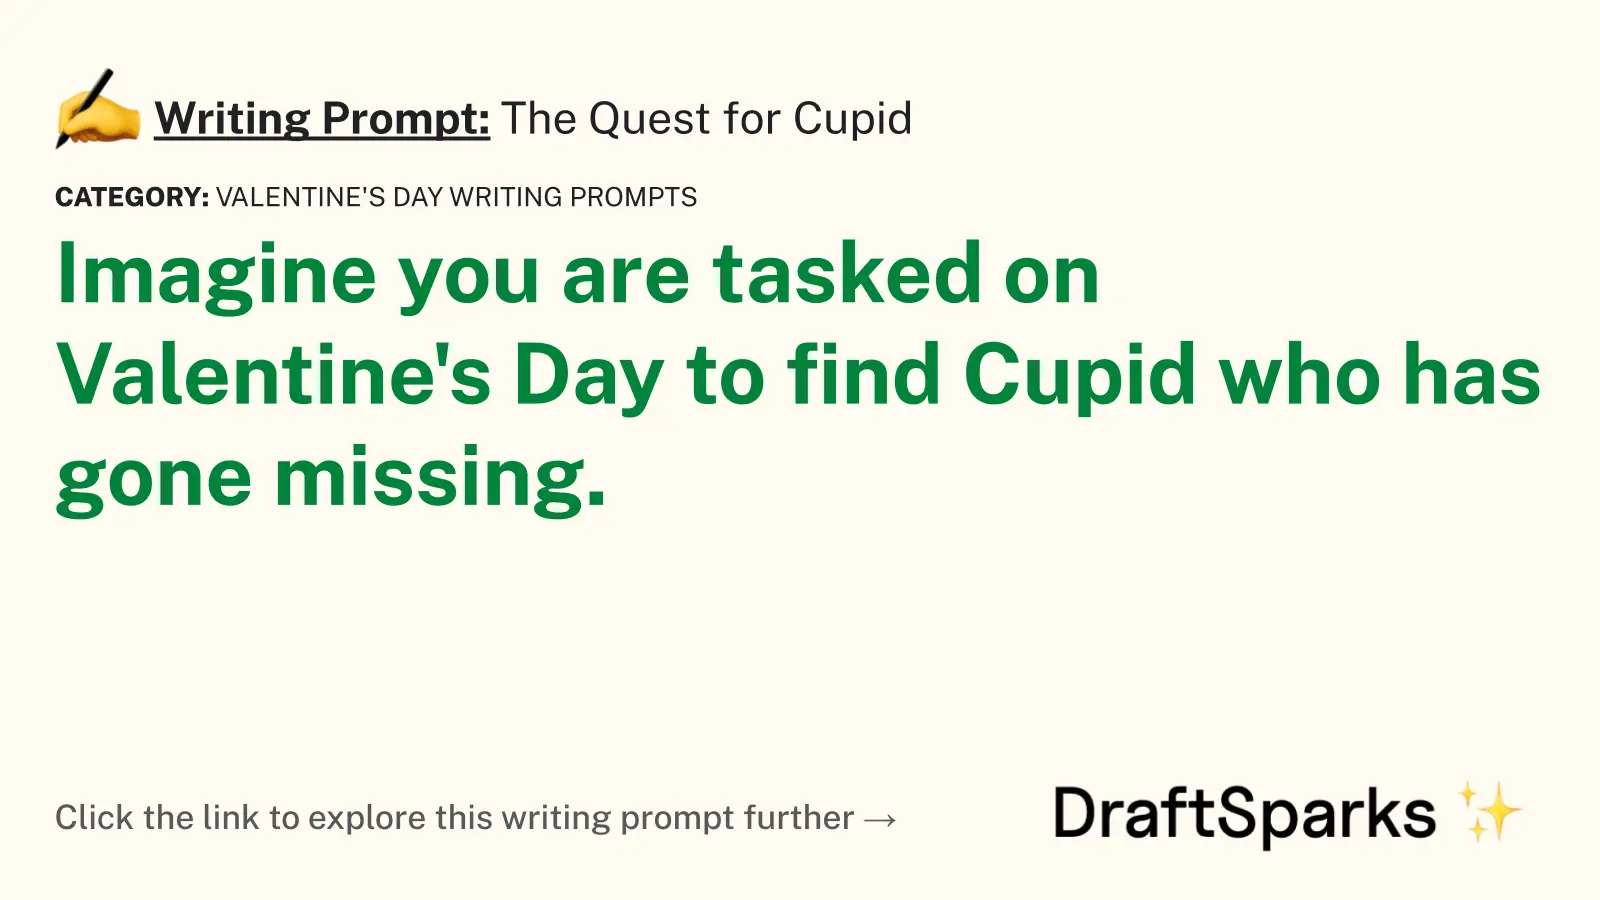 The Quest for Cupid